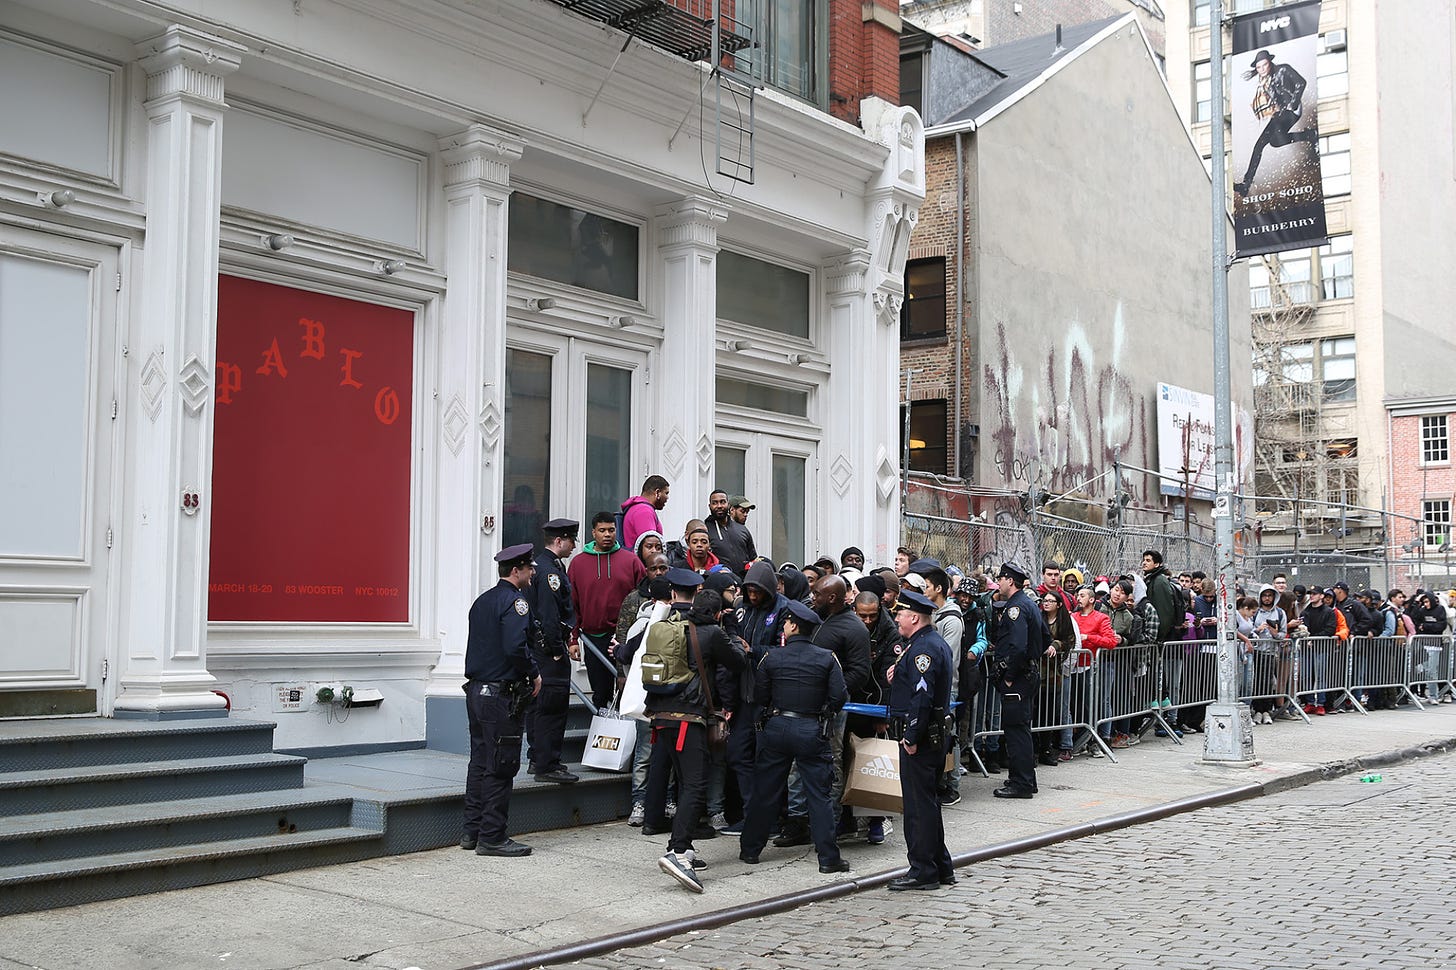 At Kanye West's pop-up shop, everyone gets a chance to feel like Pablo |  Mashable